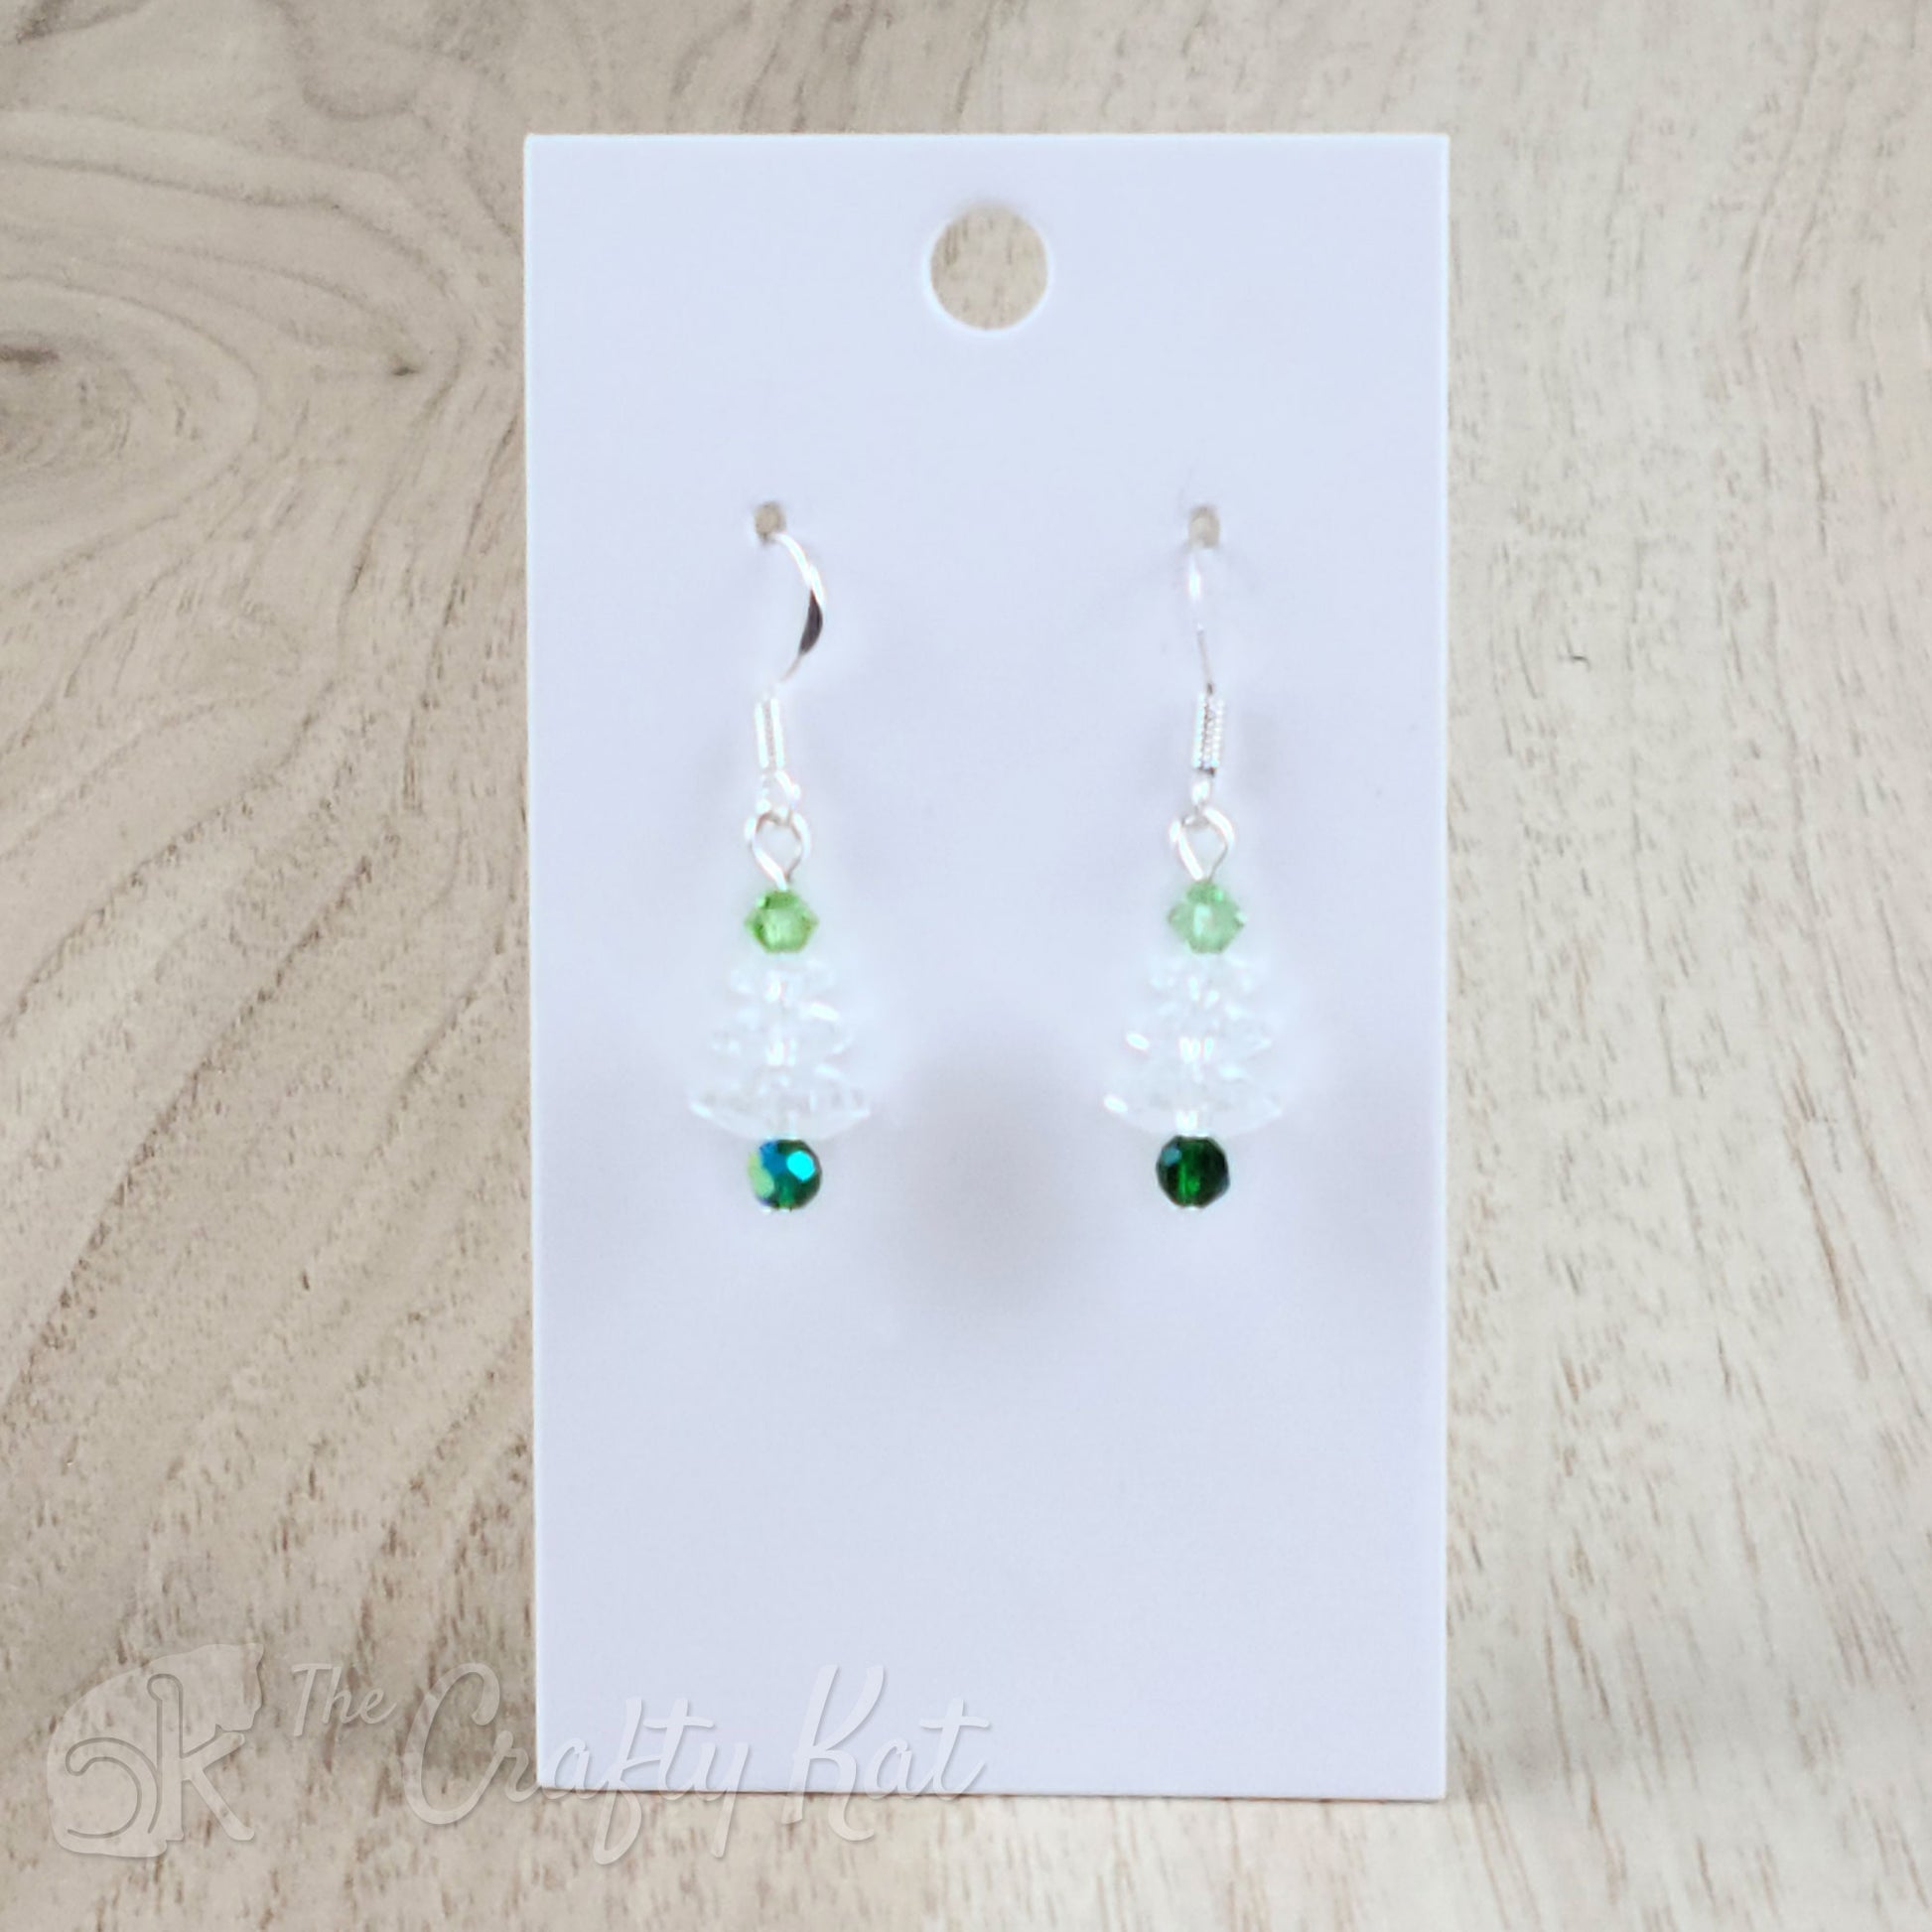 A pair of earring drops made of faceted crystal beads, each drop forming the shape of a holiday tree. This variation features an iridescent peacock green base, clear branches, and a pale green topper on silver-plated base metal.